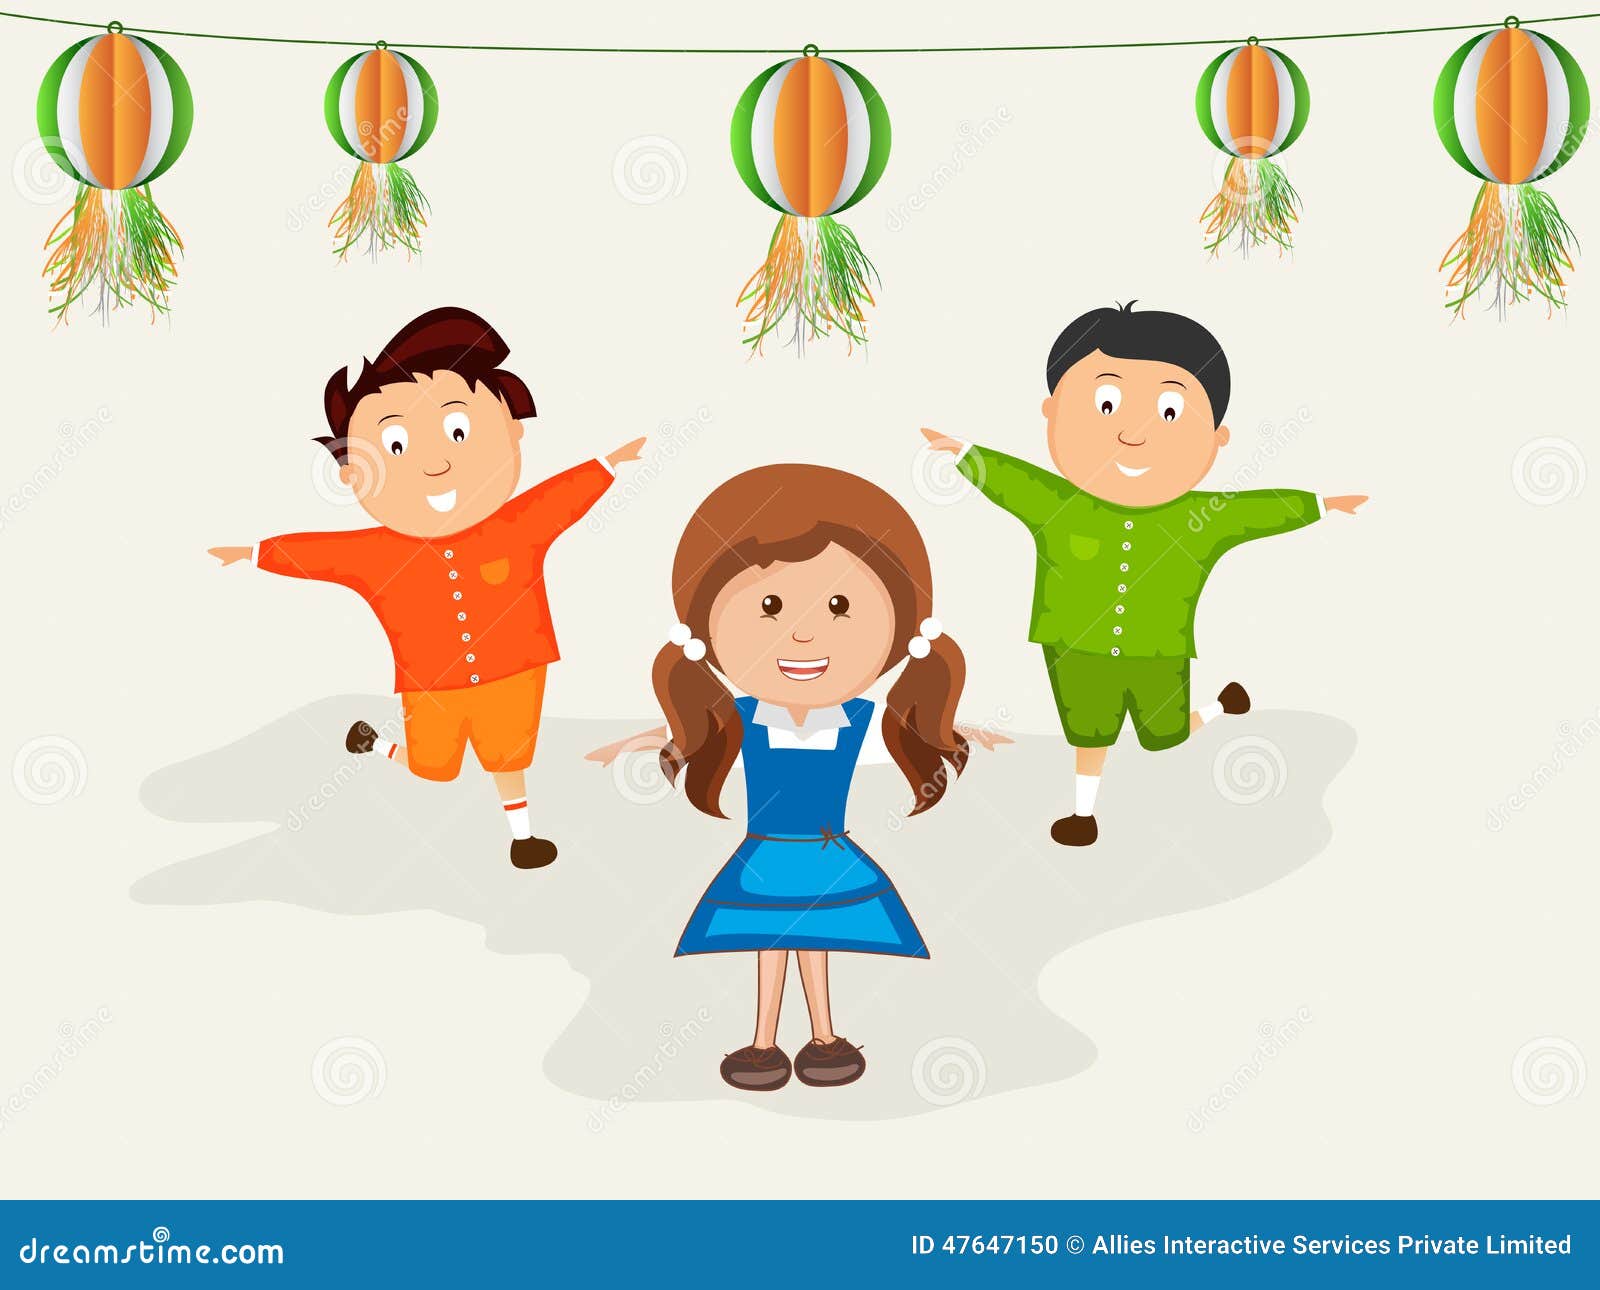 Indian Republic Day And Independence Day Celebrations Concept Stock Illustration Illustration Of Celebrations Festival 47647150 How to draw simple republic day special image for kids | independence day drawing for beginners. dreamstime com